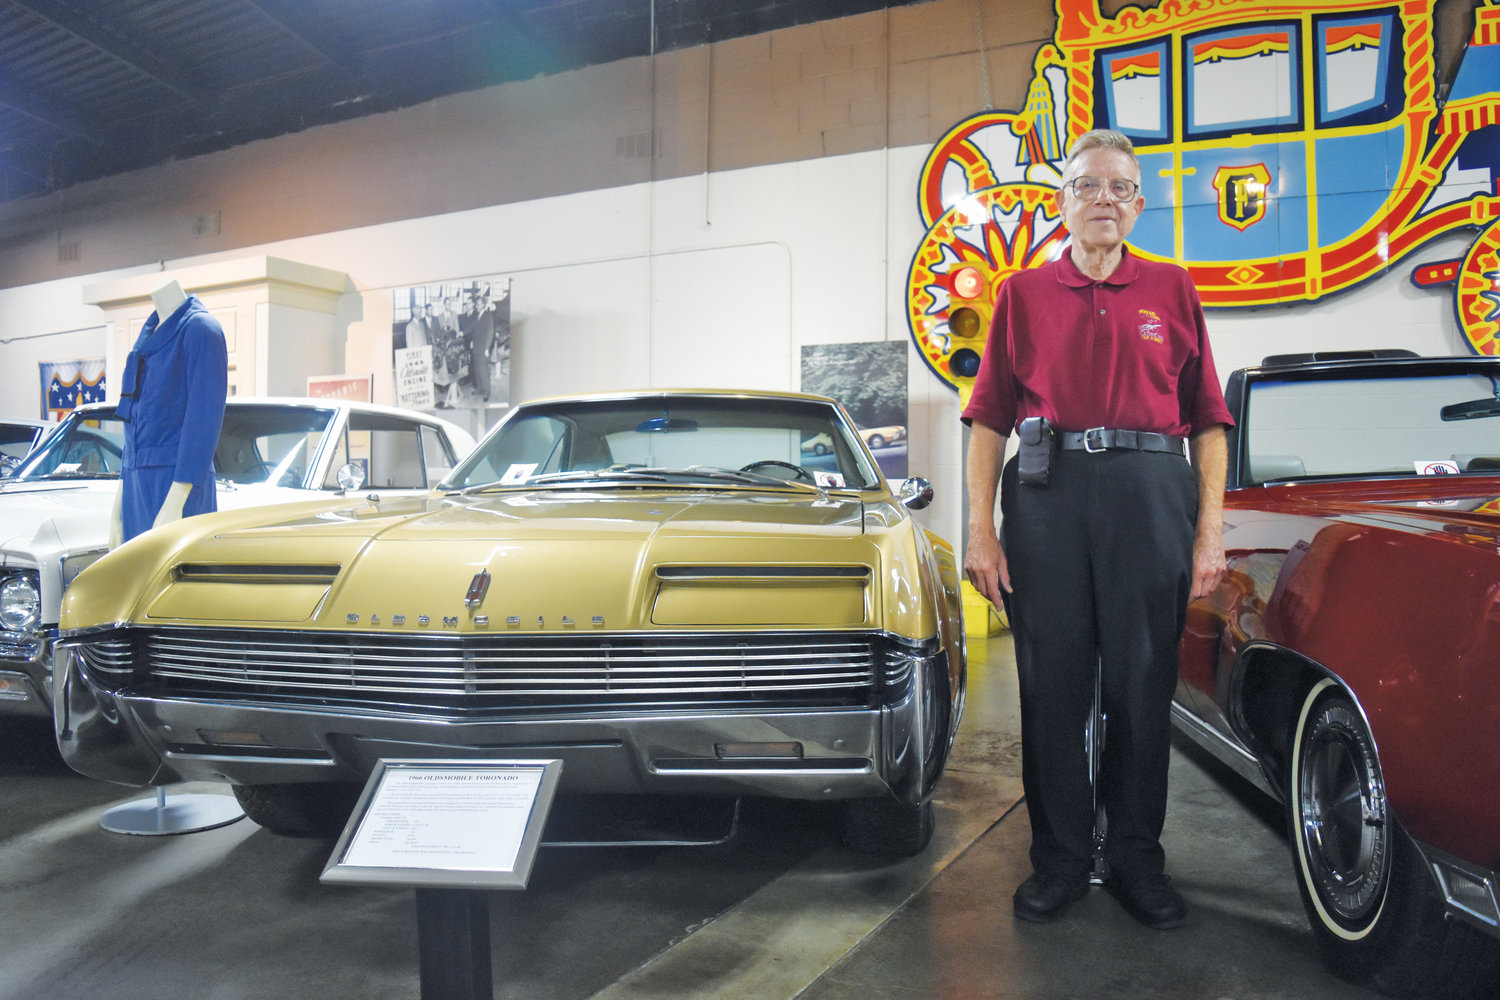 R.E. Olds Transportation Museum volunteer Jerry Garfield stands next to a 1966 Oldsmobile Toronado.